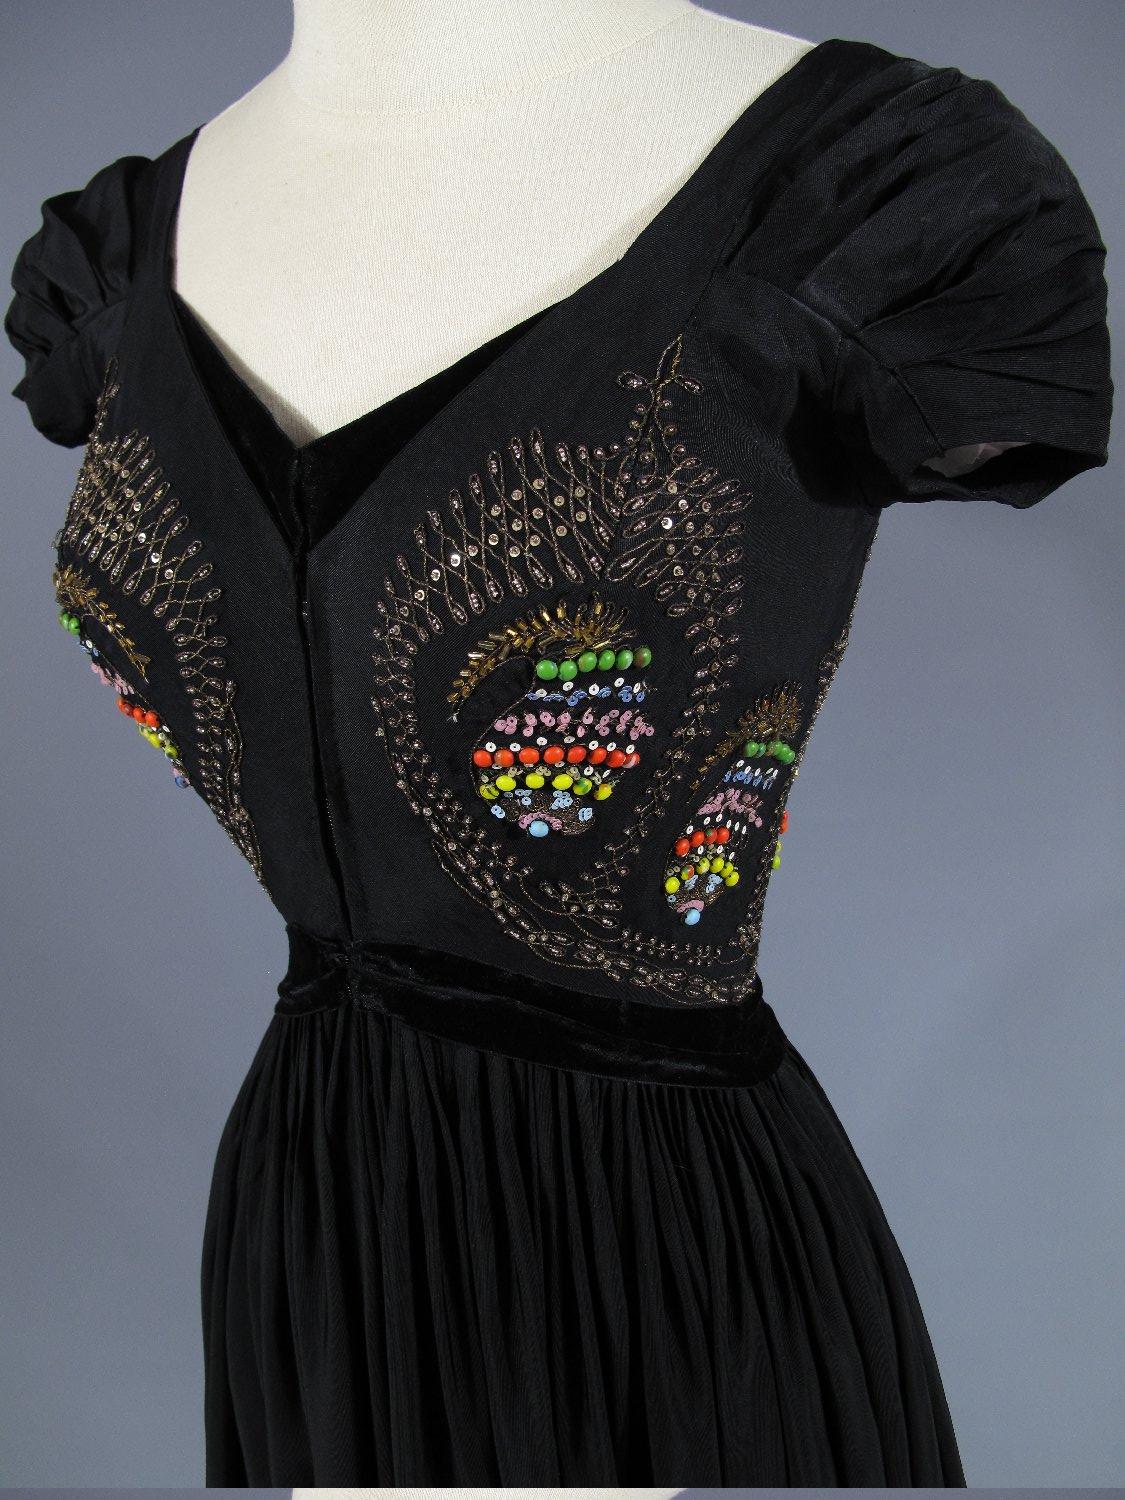 Circa 1953

France

Grand Soir dress in black silk faille by Madame Grès Haute Couture, 1953 collection (similar dress, cover of 